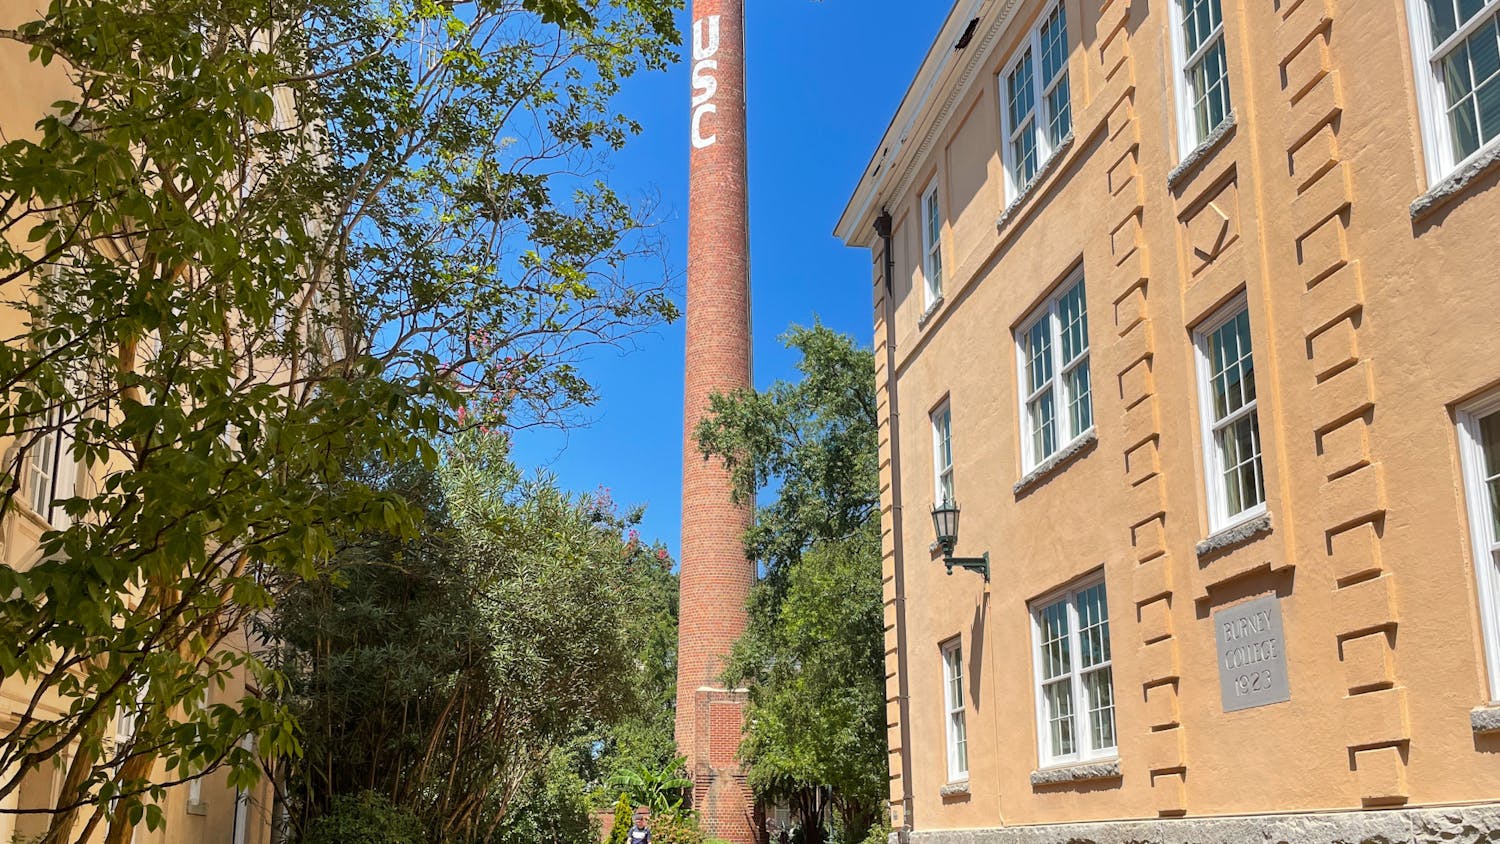 The USC Smokestack located at the heart of campus on Aug. 31, 2022.